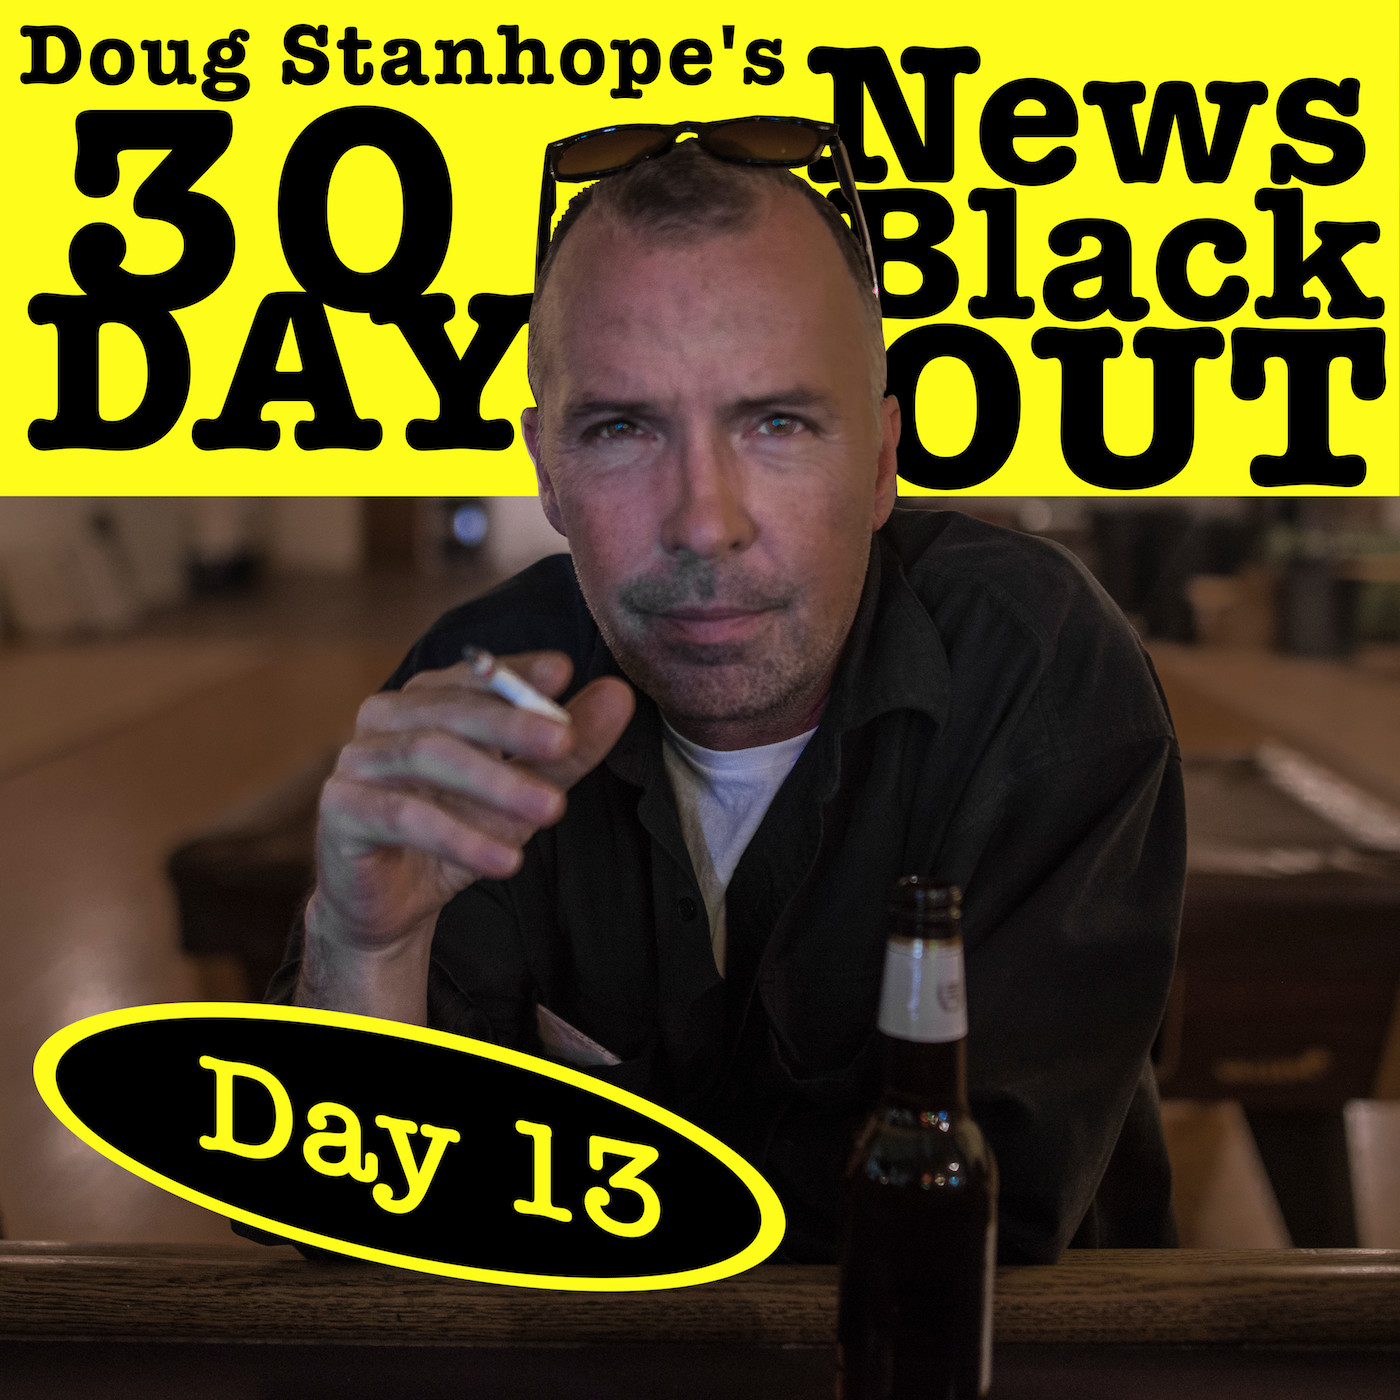 EP.#377: Day 13 - Stanhope’s 30 Day News Blackout